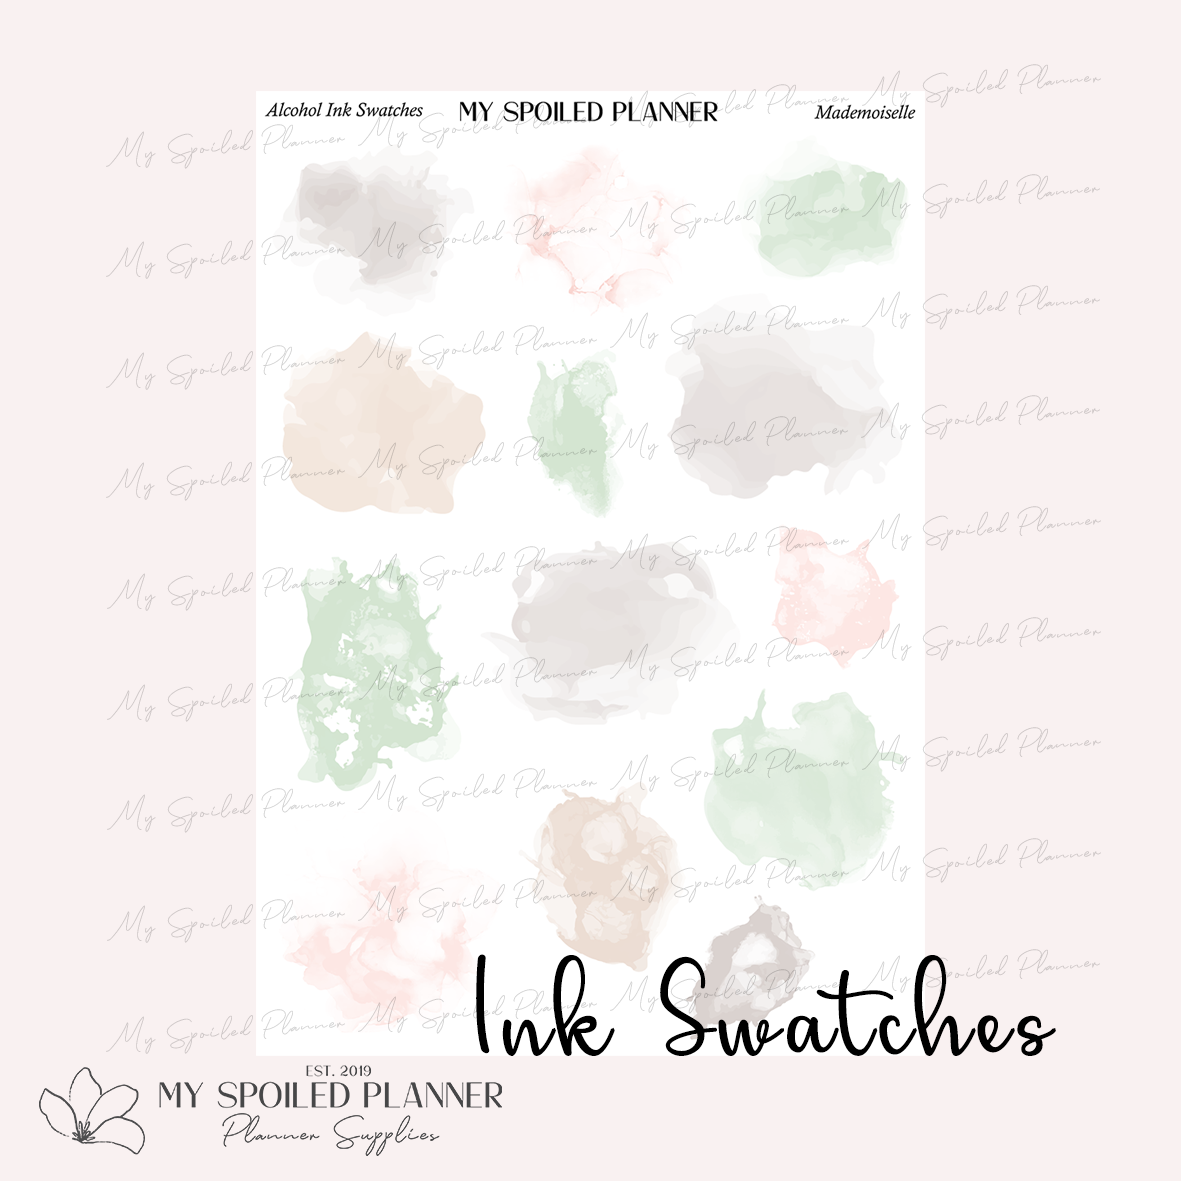 Mademoiselle Ink Swatches